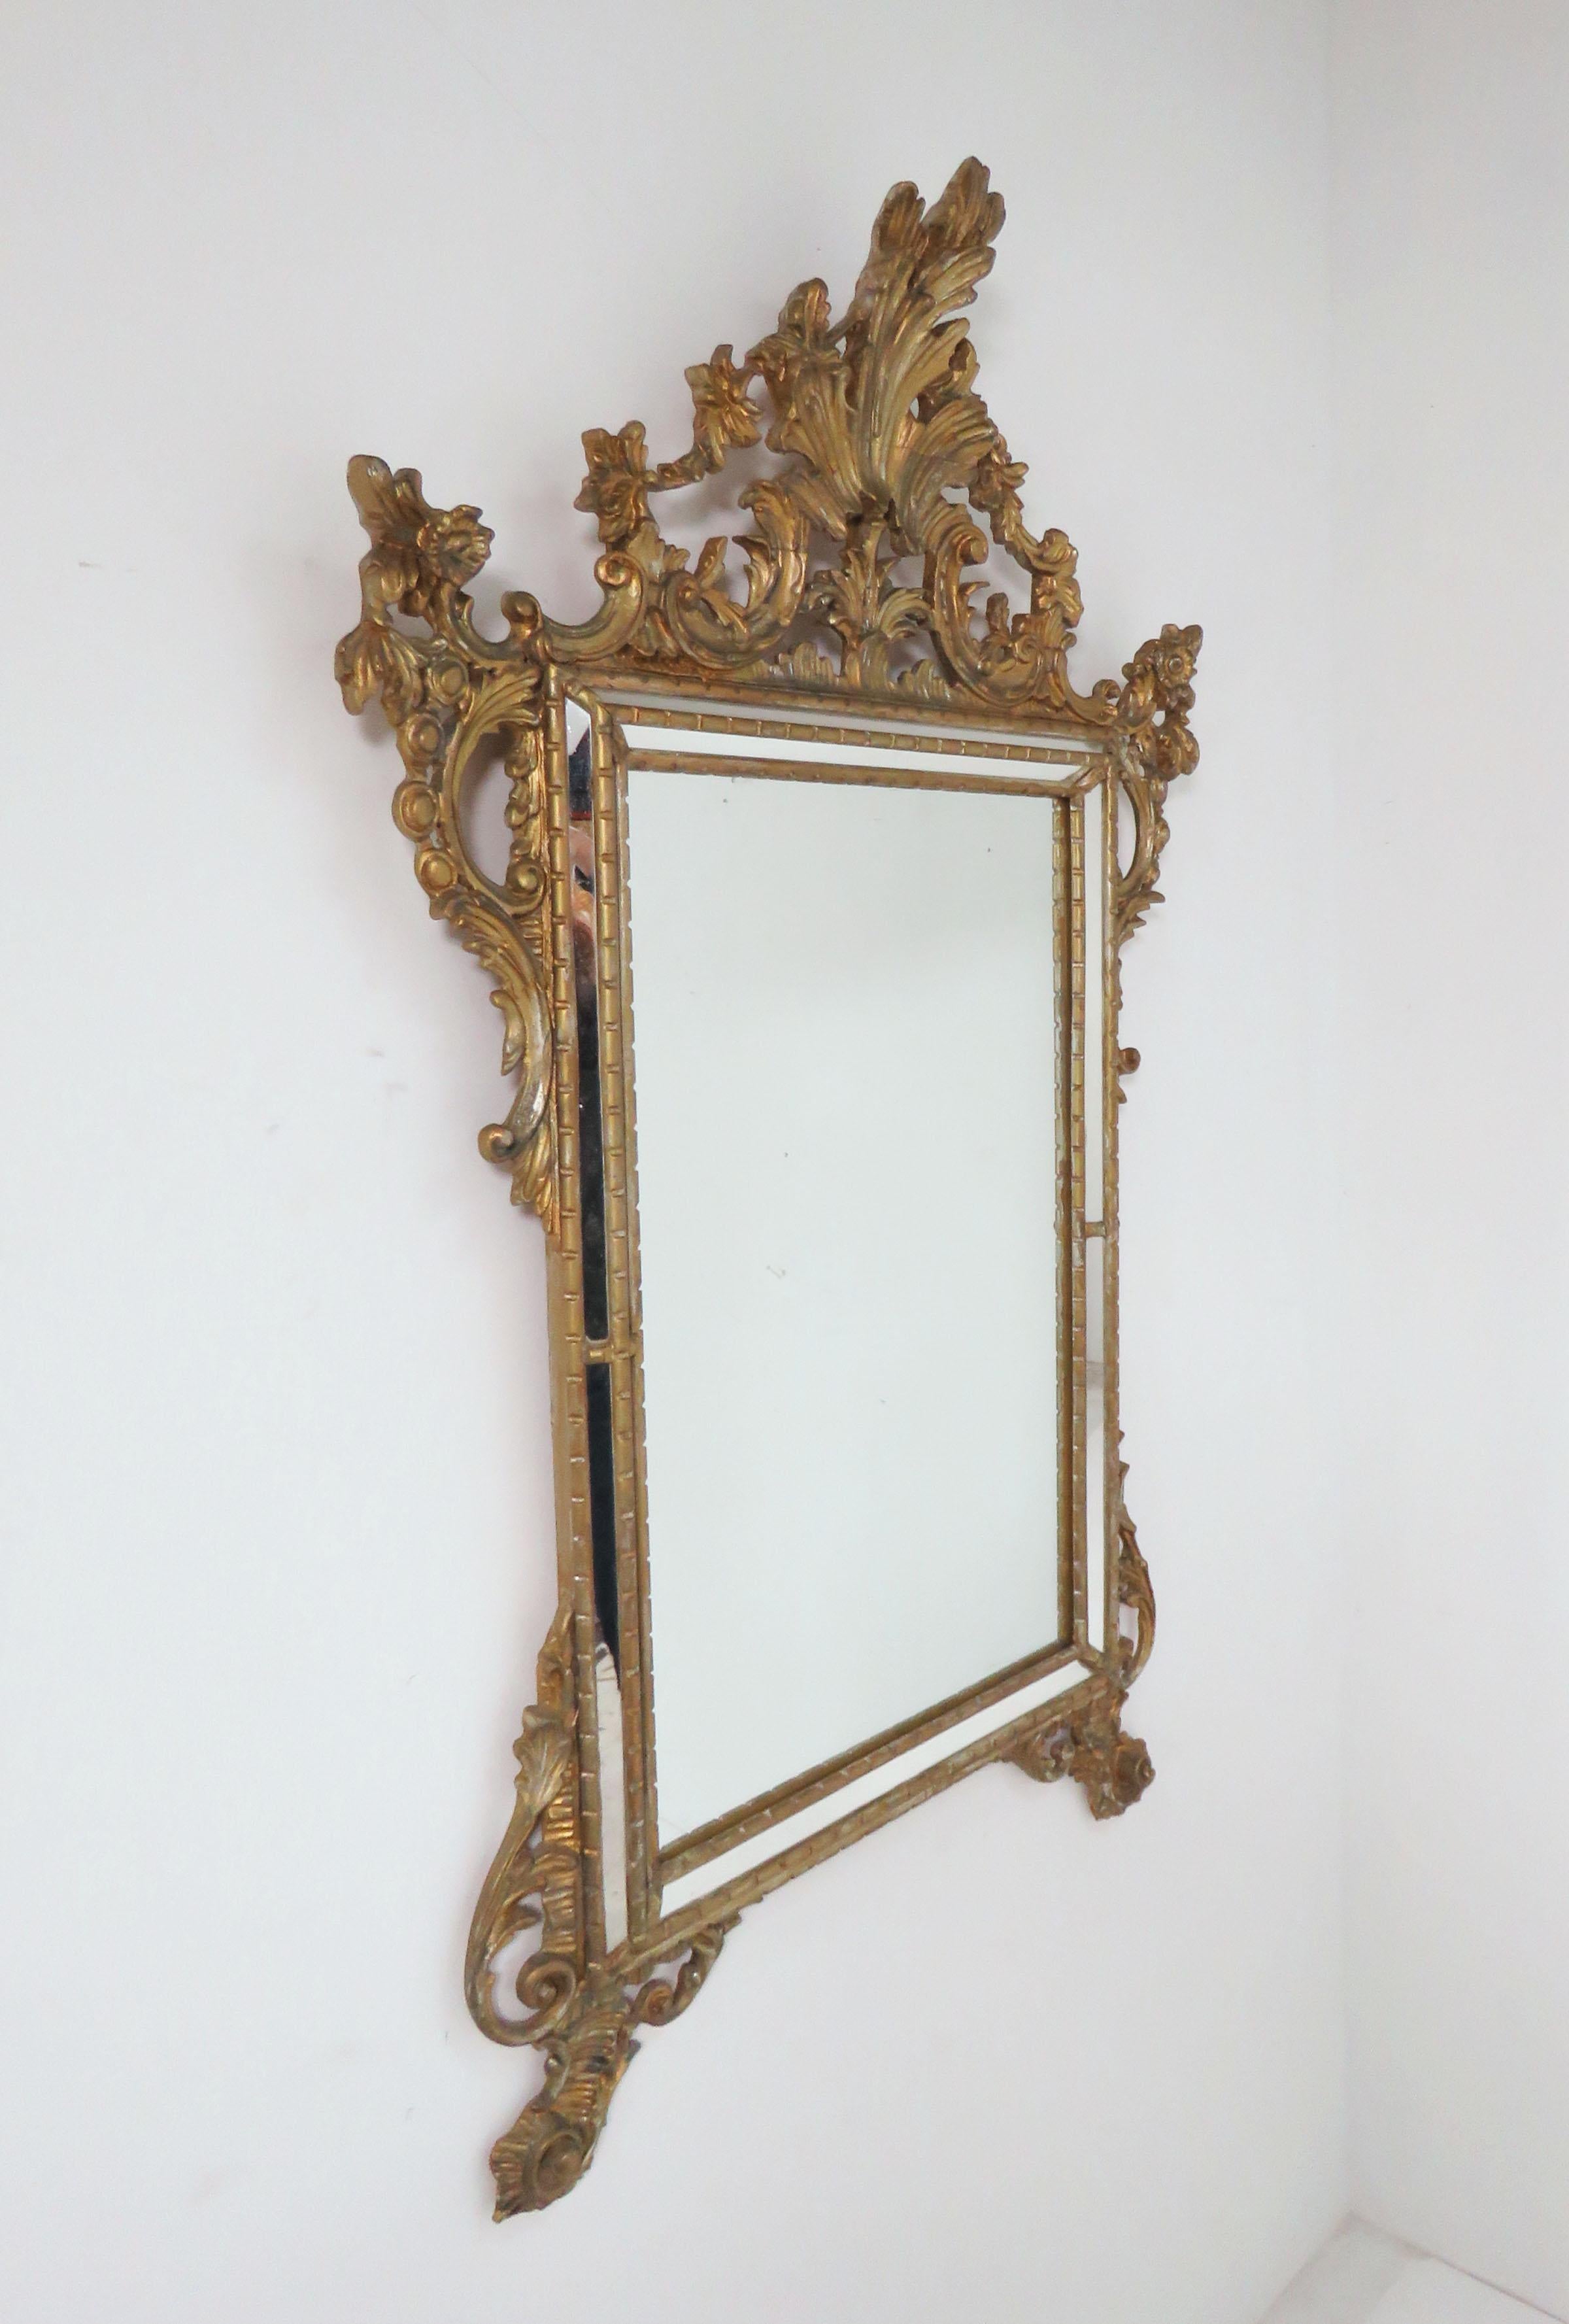 A vintage hand carved giltwood Venetian style wall mirror by Casa Bique, made in Italy, circa mid-late 20th century.